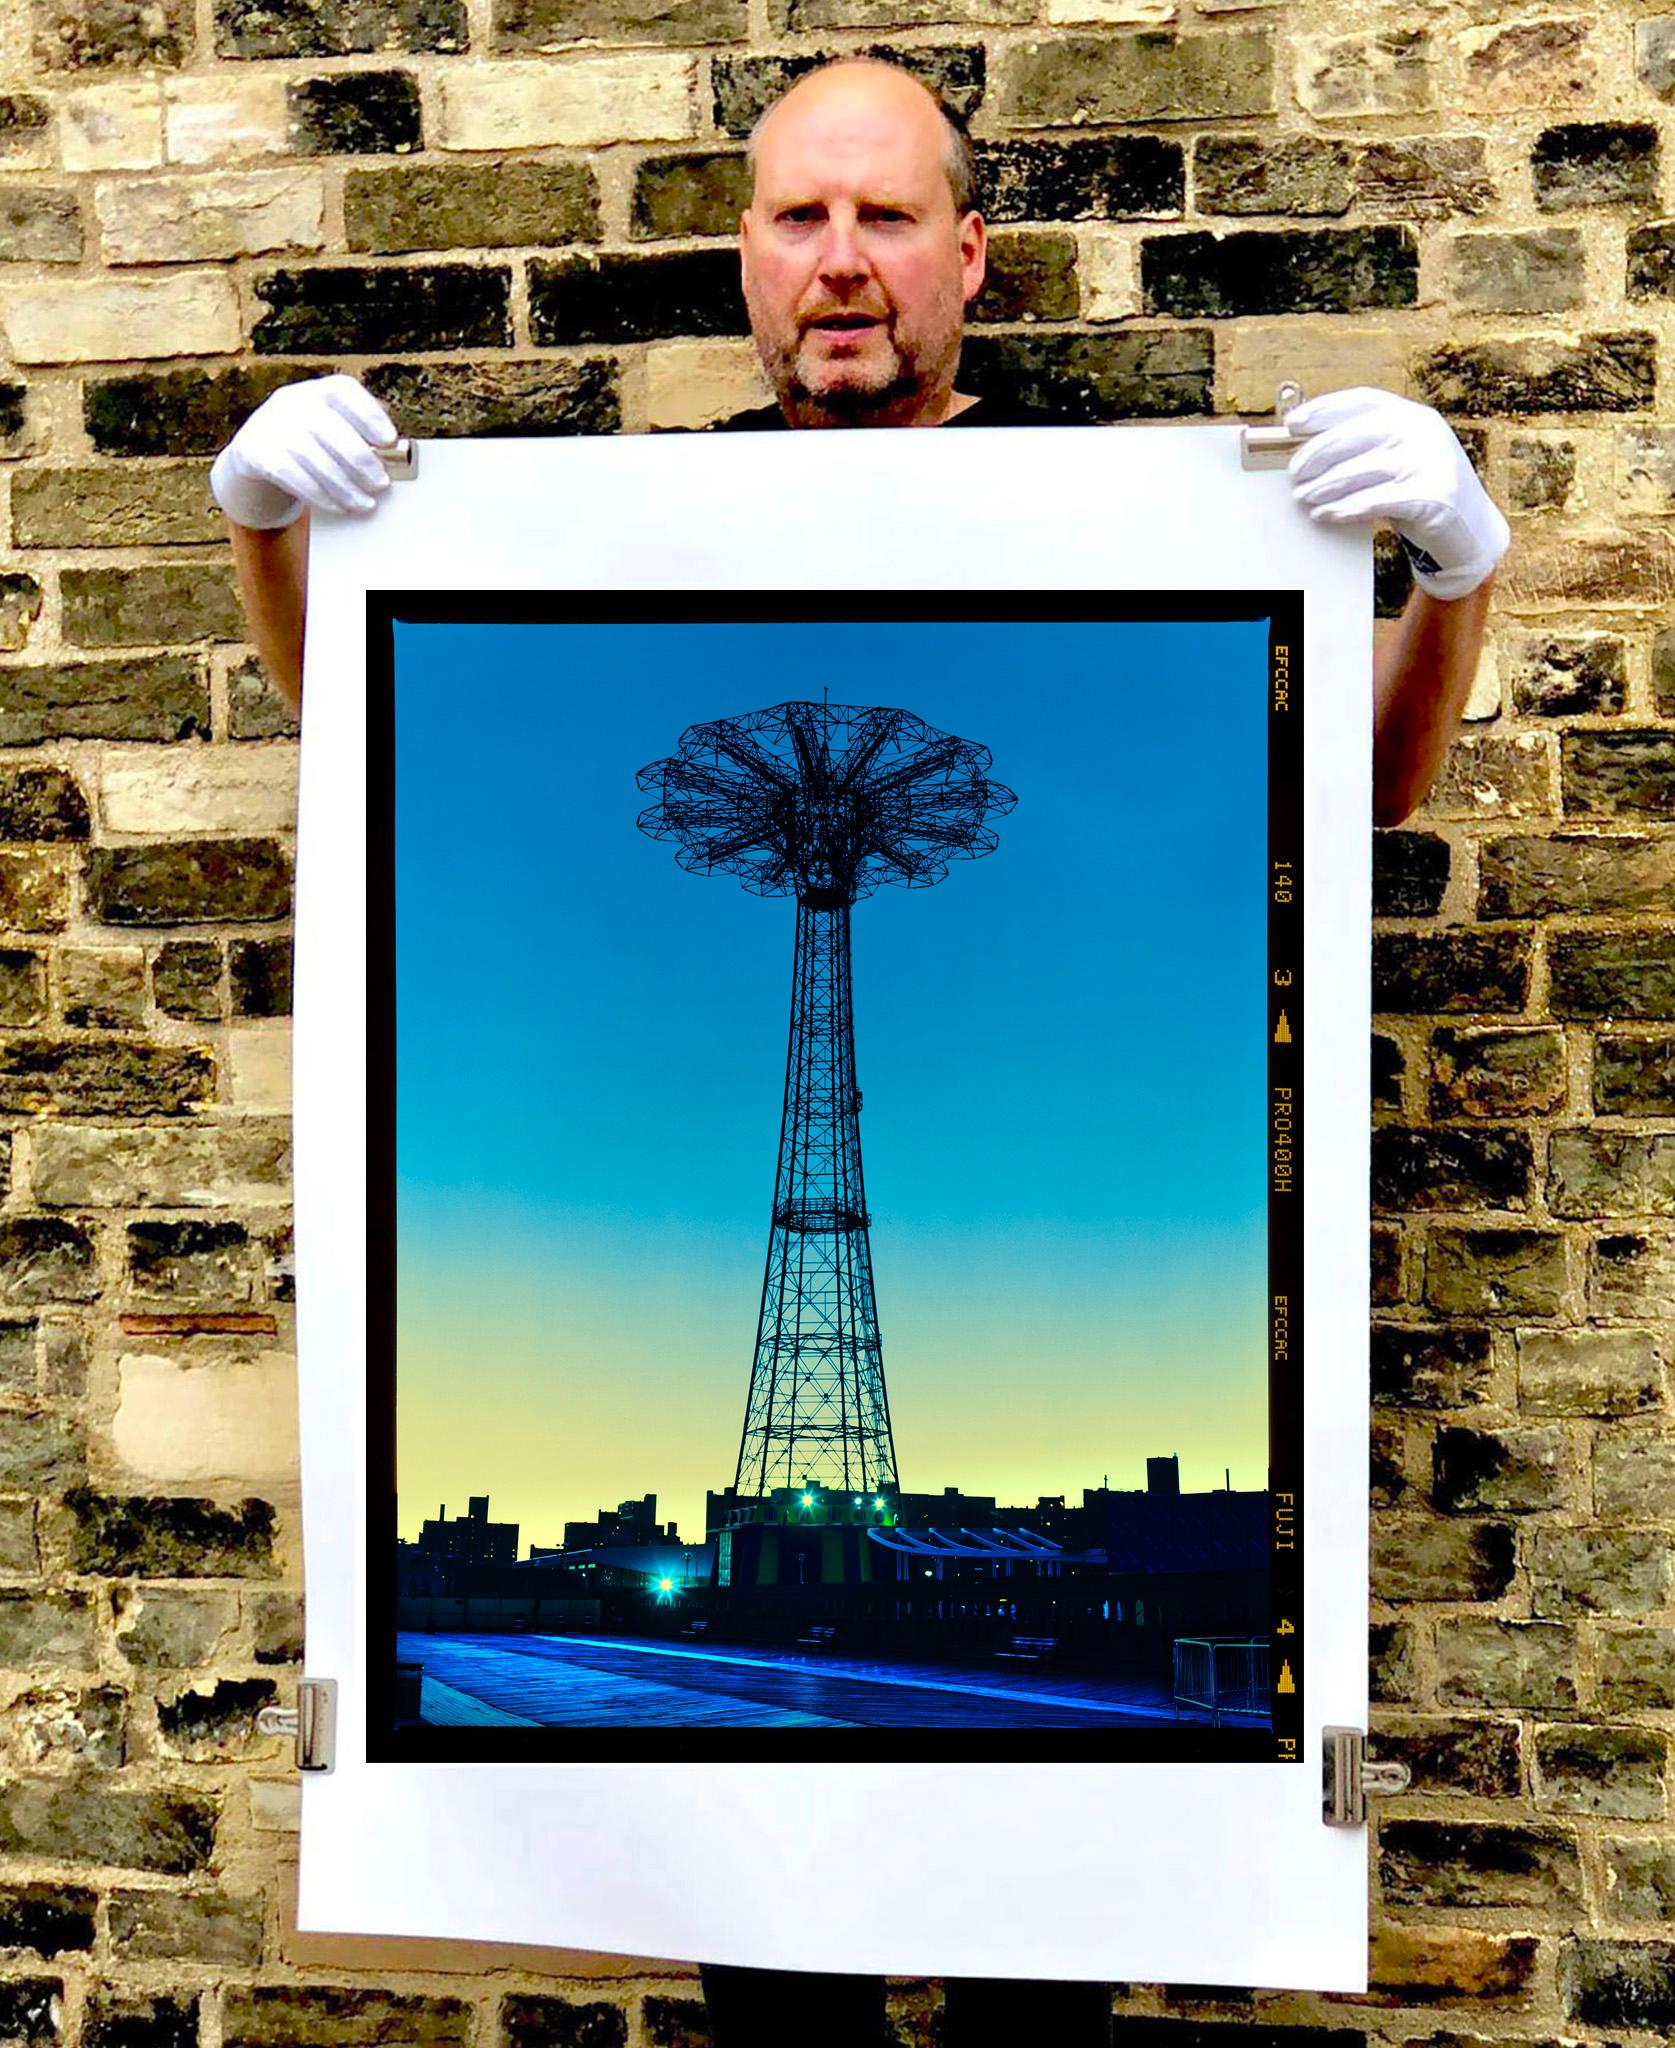 The iconic Coney Island structure, Parachute Jump, photography by Richard Heeps, printed from negative full frame with the Fuji Film border. 

This artwork is a limited edition of 25, gloss photographic print, accompanied by a signed and numbered